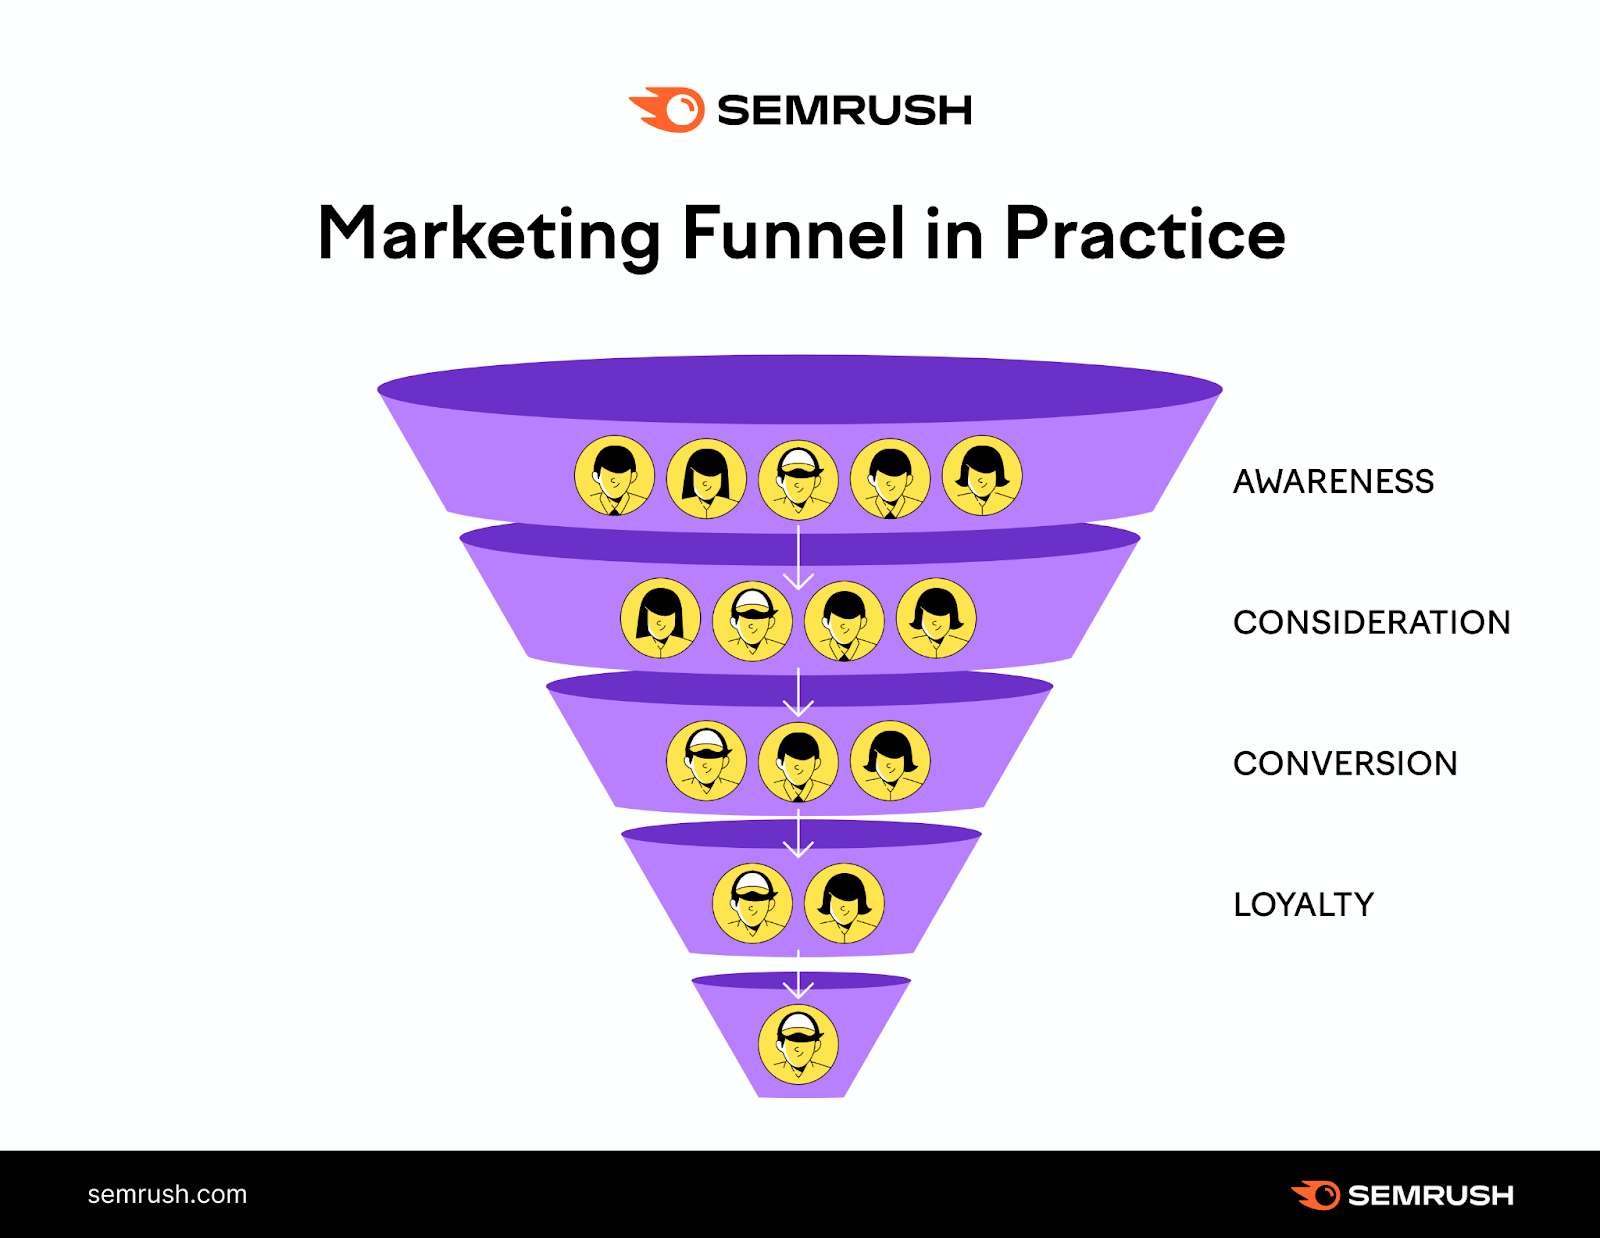 An infographic showing a selling  funnel, with awareness, consideration, conversion and loyalty stages